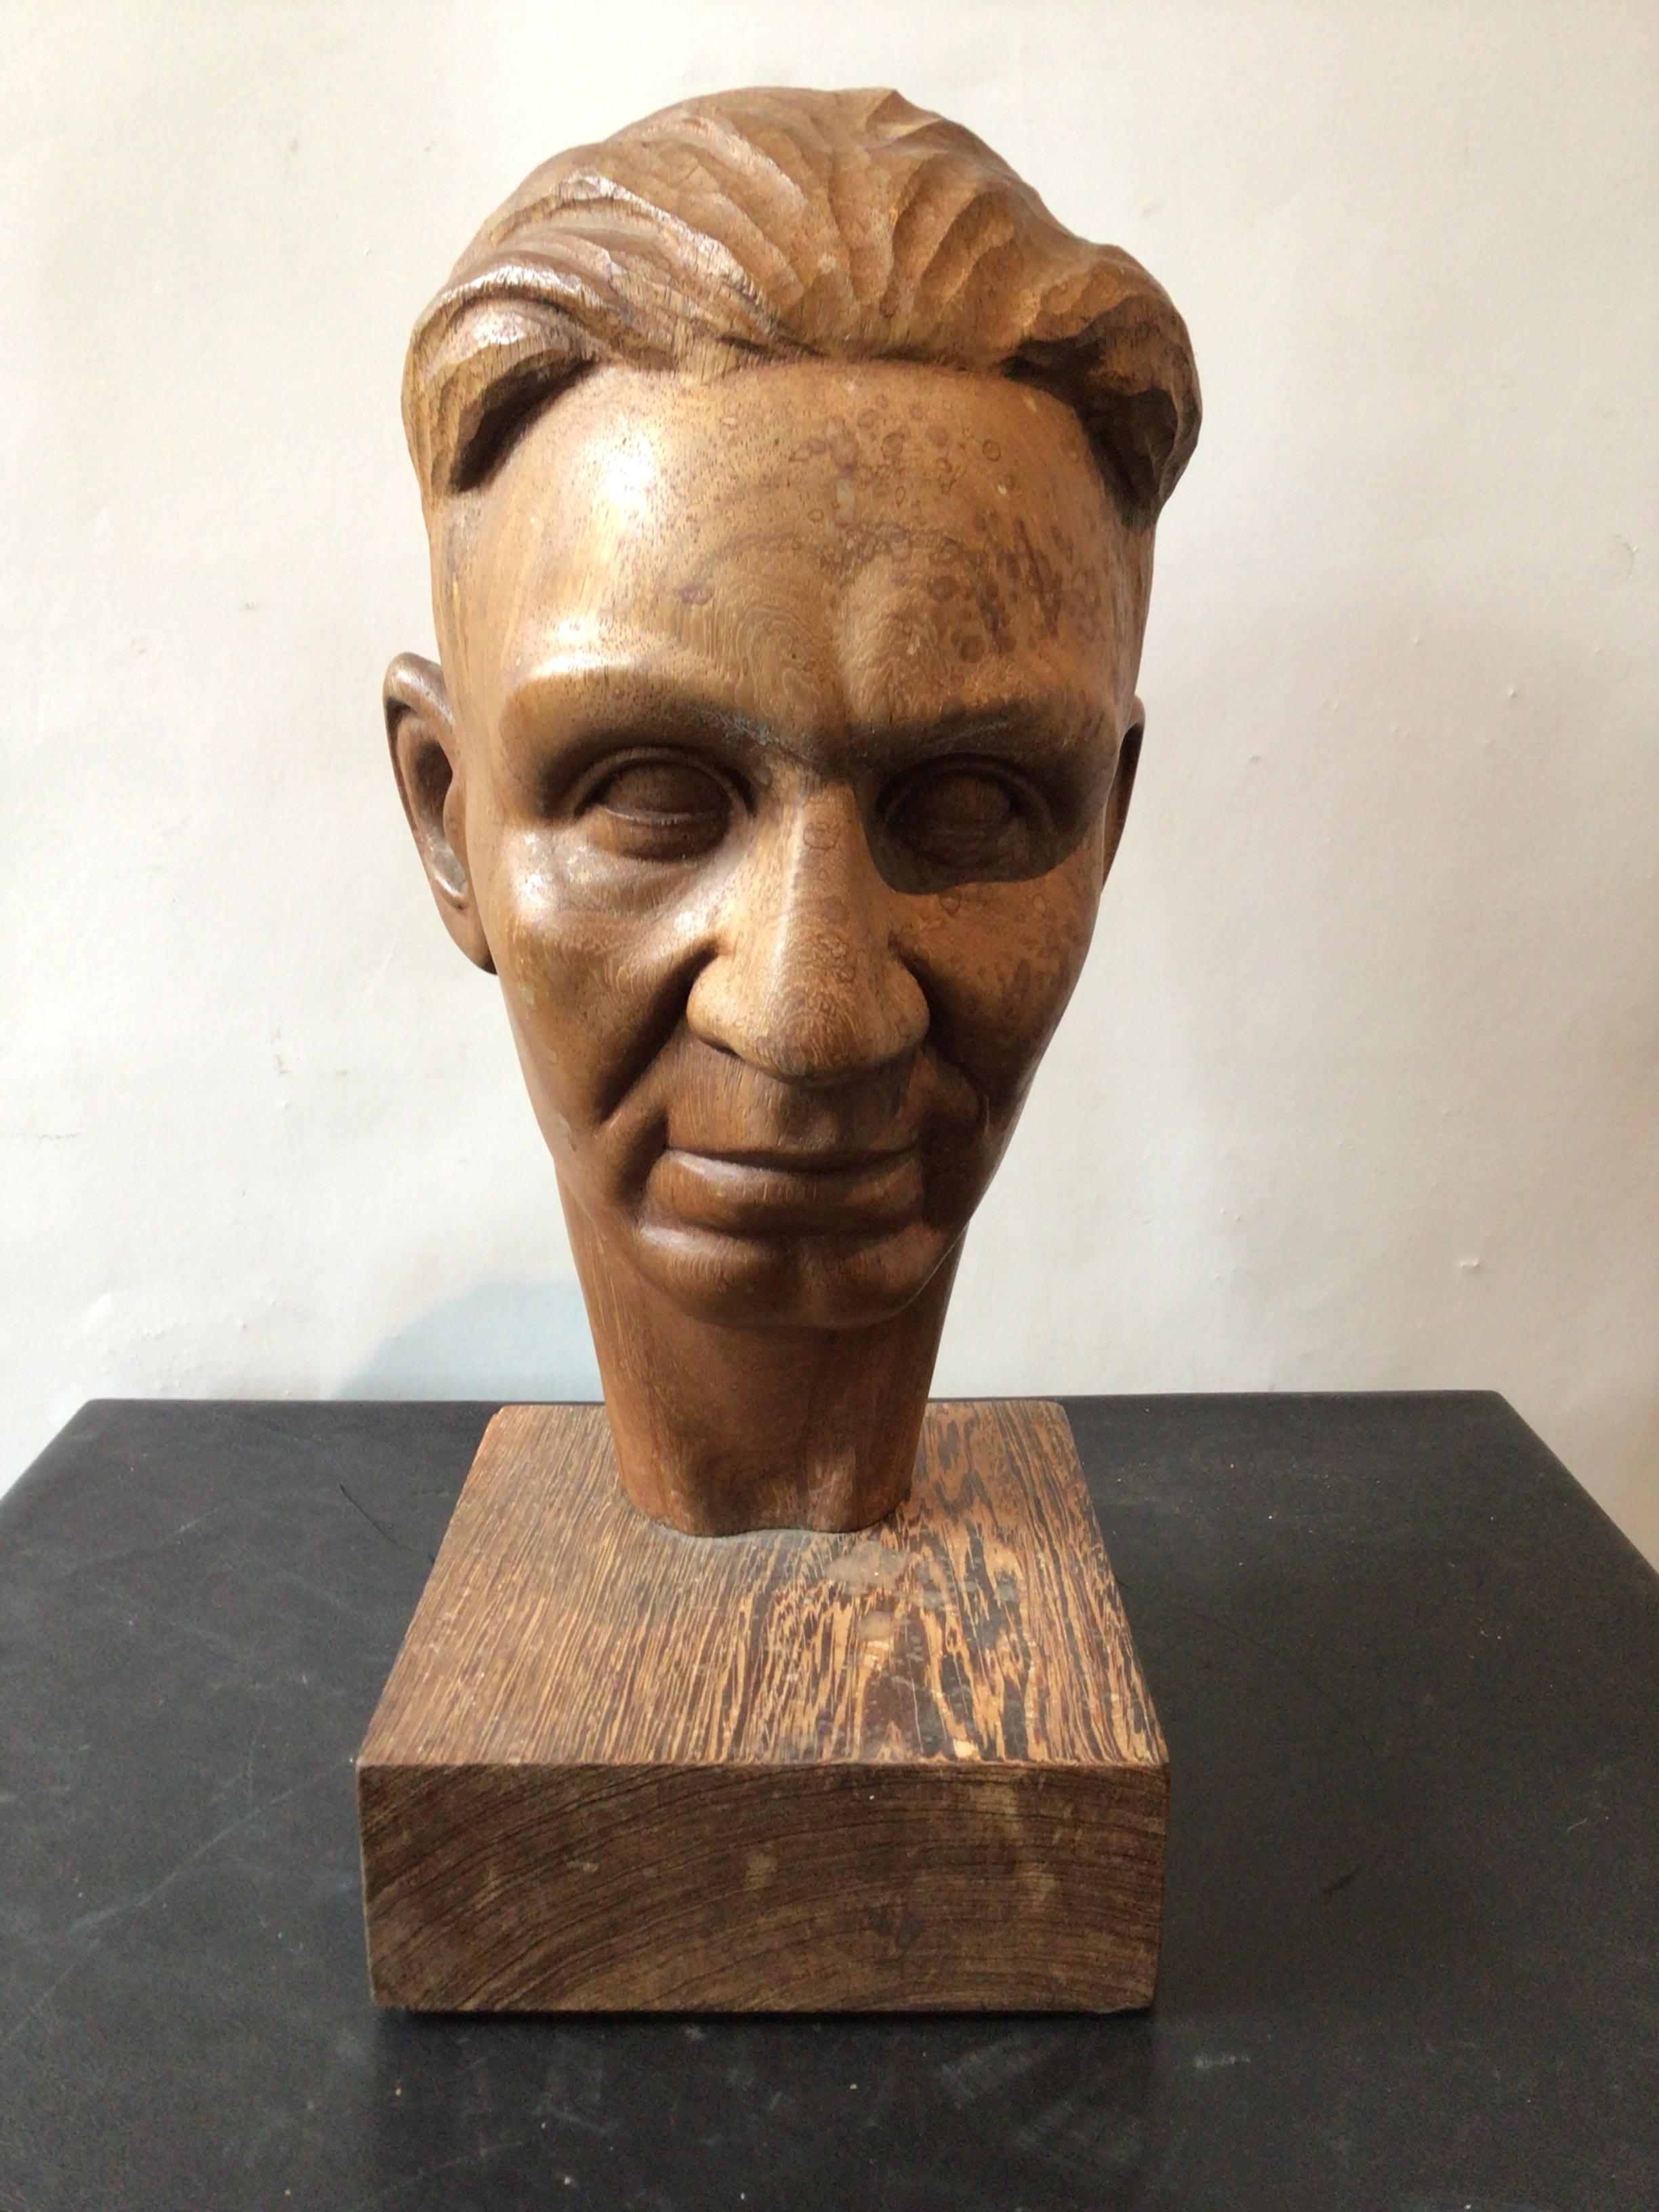 1950s Carved wood sculpture o a man’s head. Signed by artist.